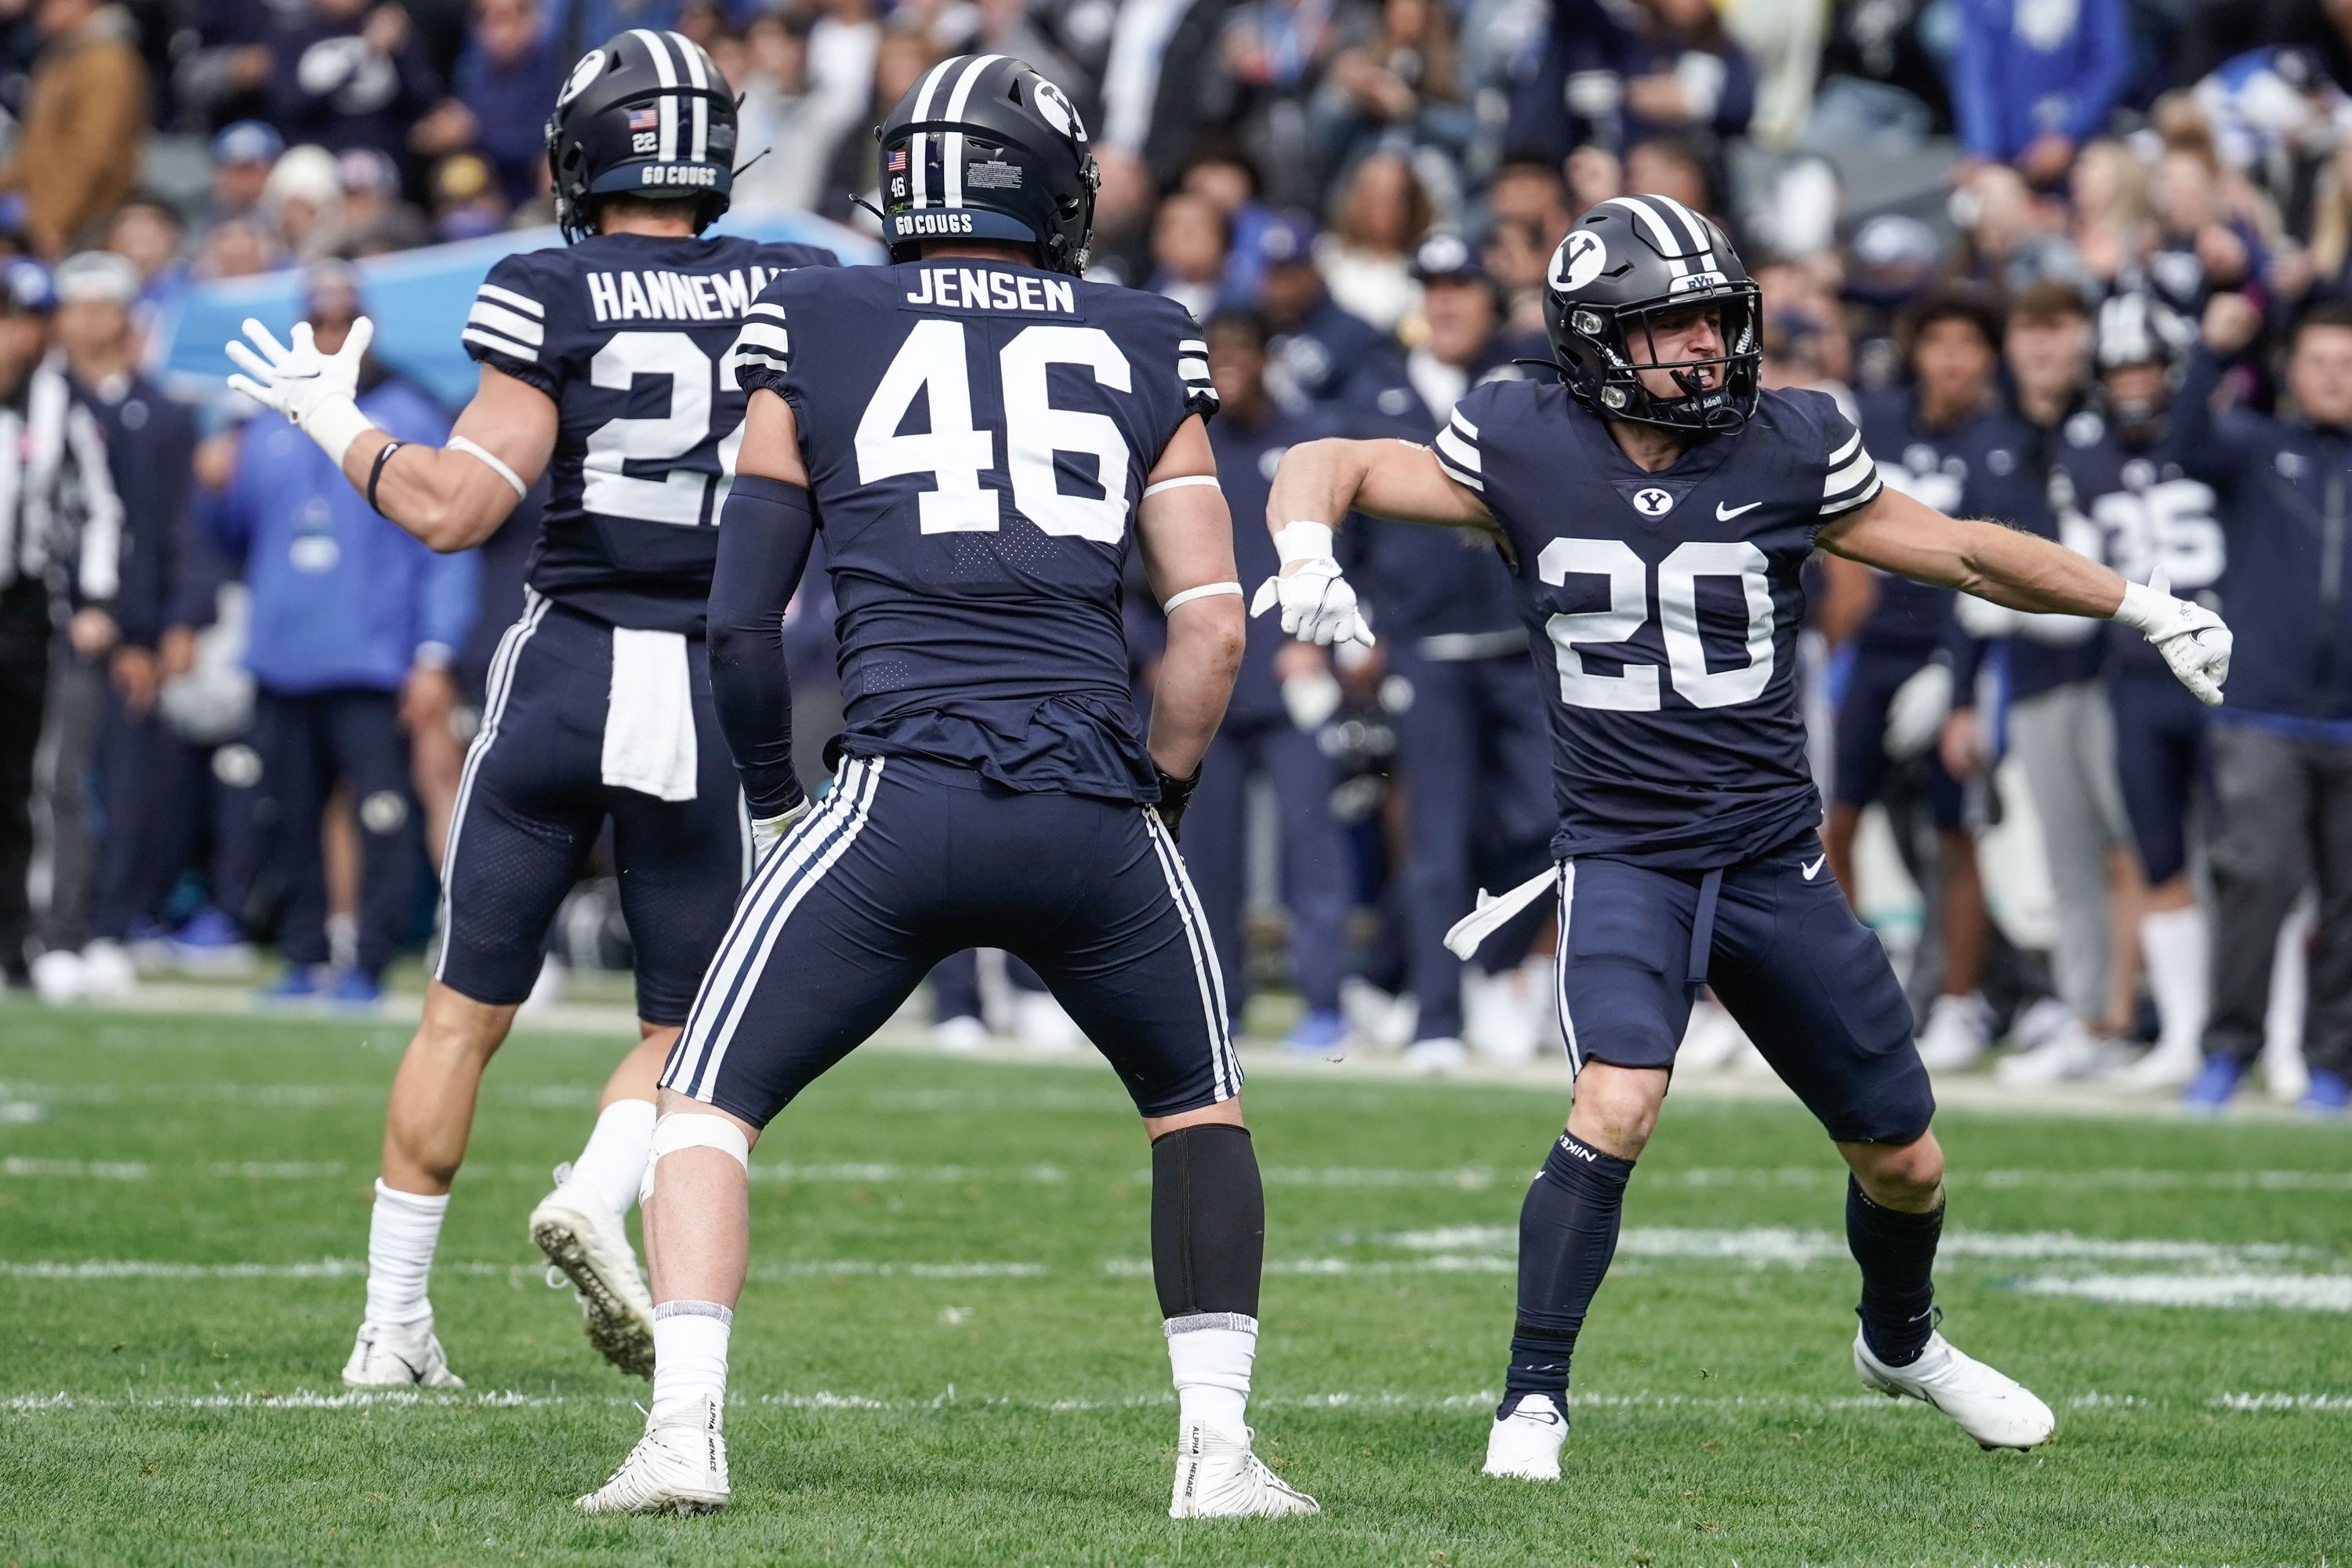 BYU players celebrate against Boise State during an NCAA college football game at LaVell Edwards Stadium in Provo on Saturday, Oct. 9, 2021.